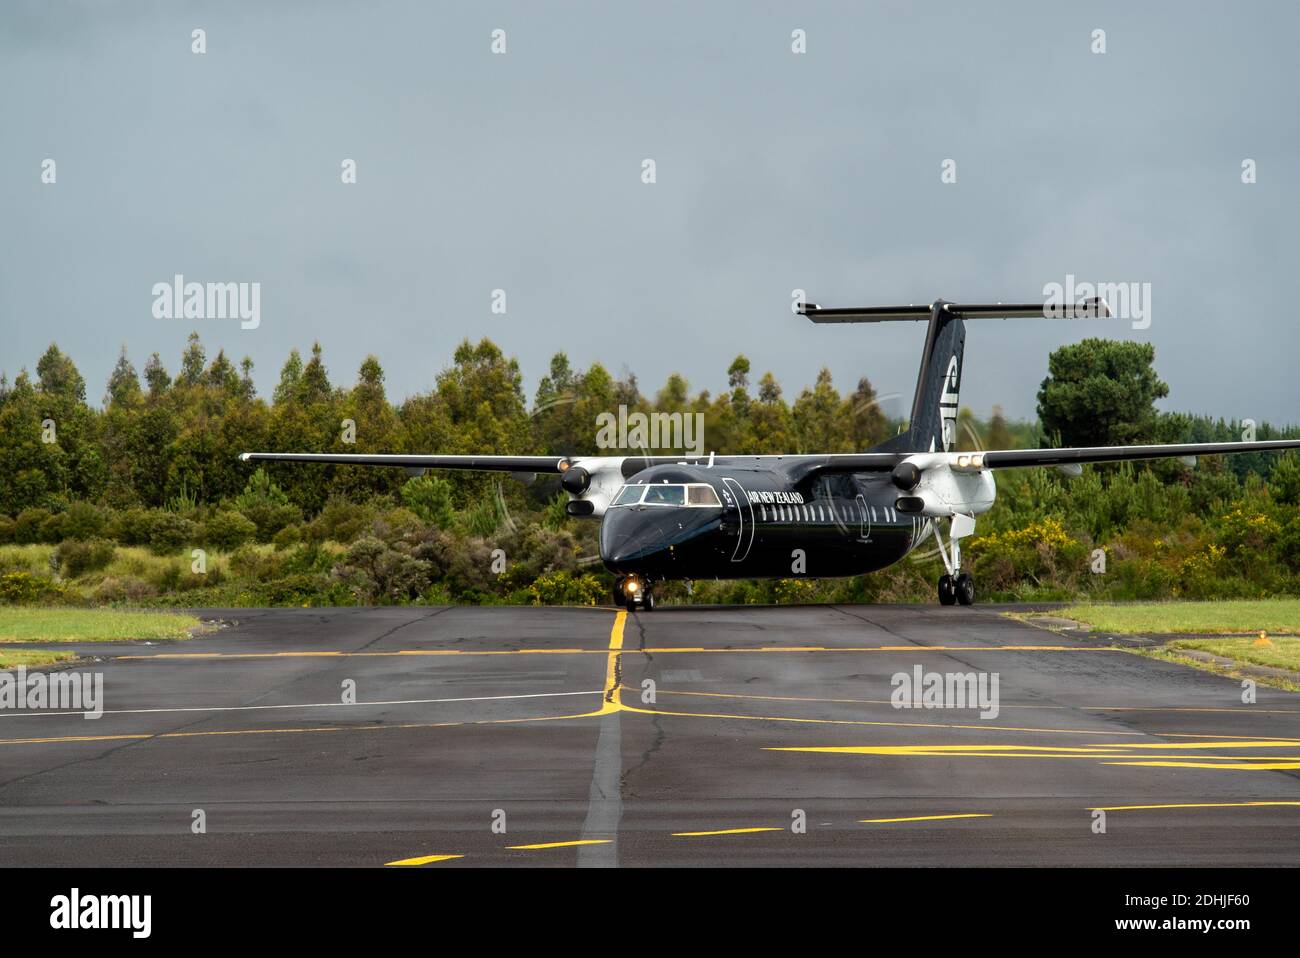 An Air New Zealand Bombardier Dash 8 Q300 aircraft in all black livery at Taupo Airport Stock Photo